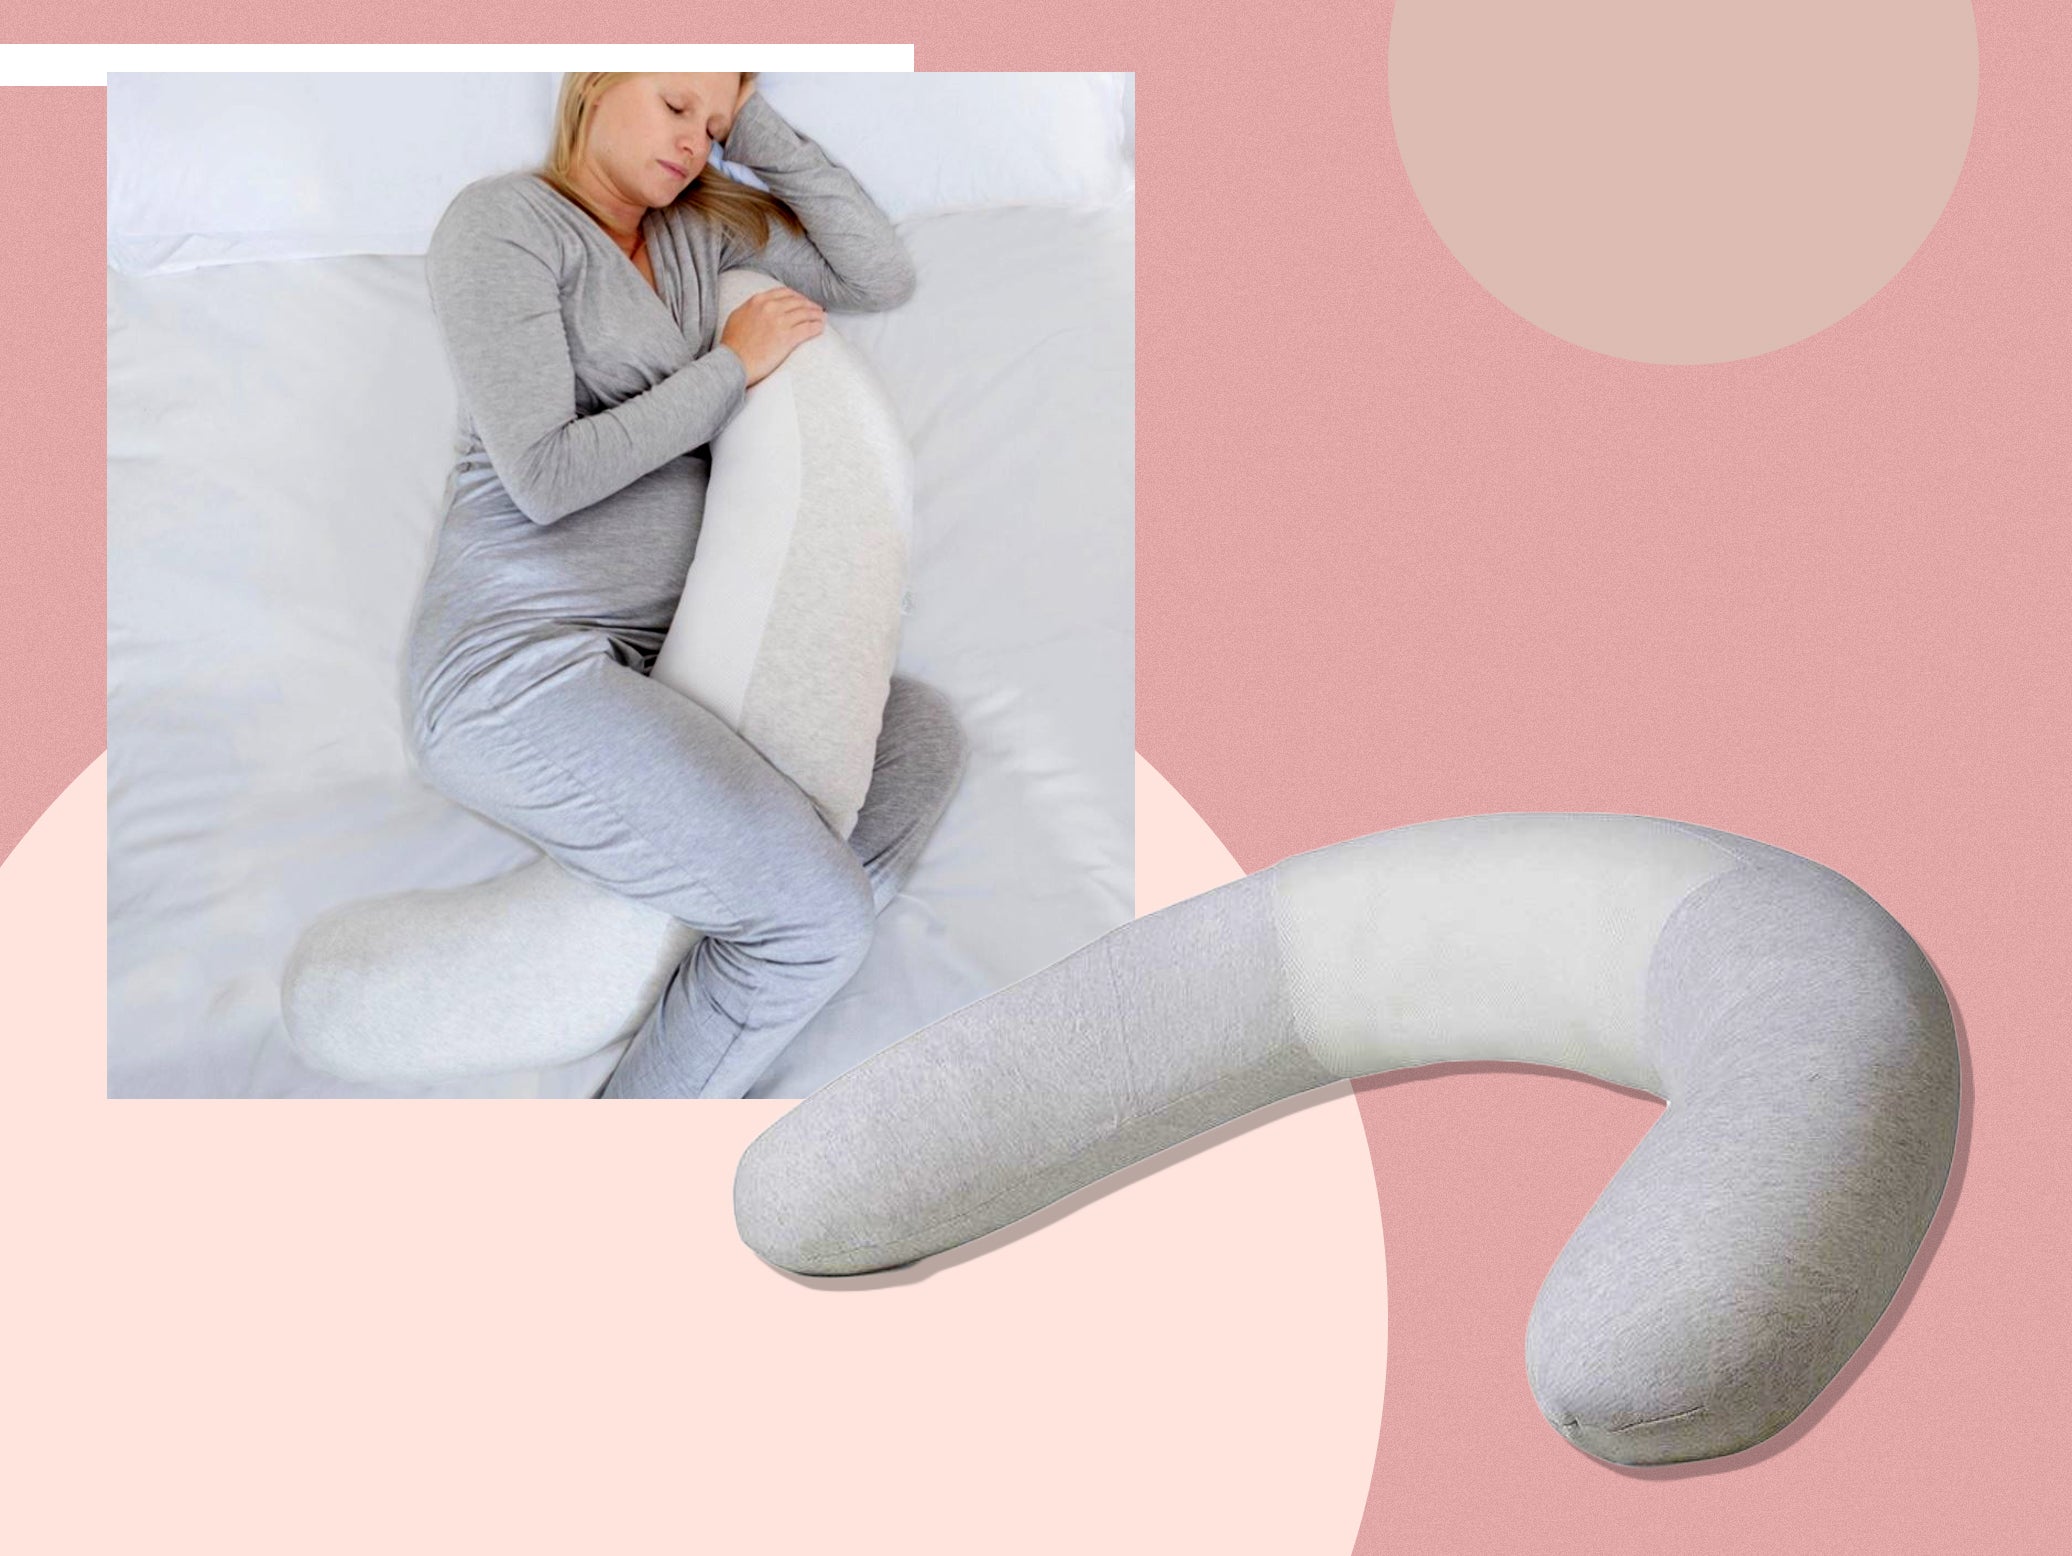 We reviewed this pillow during our third trimester and then continued to test as a feeding pillow once the baby had arrived